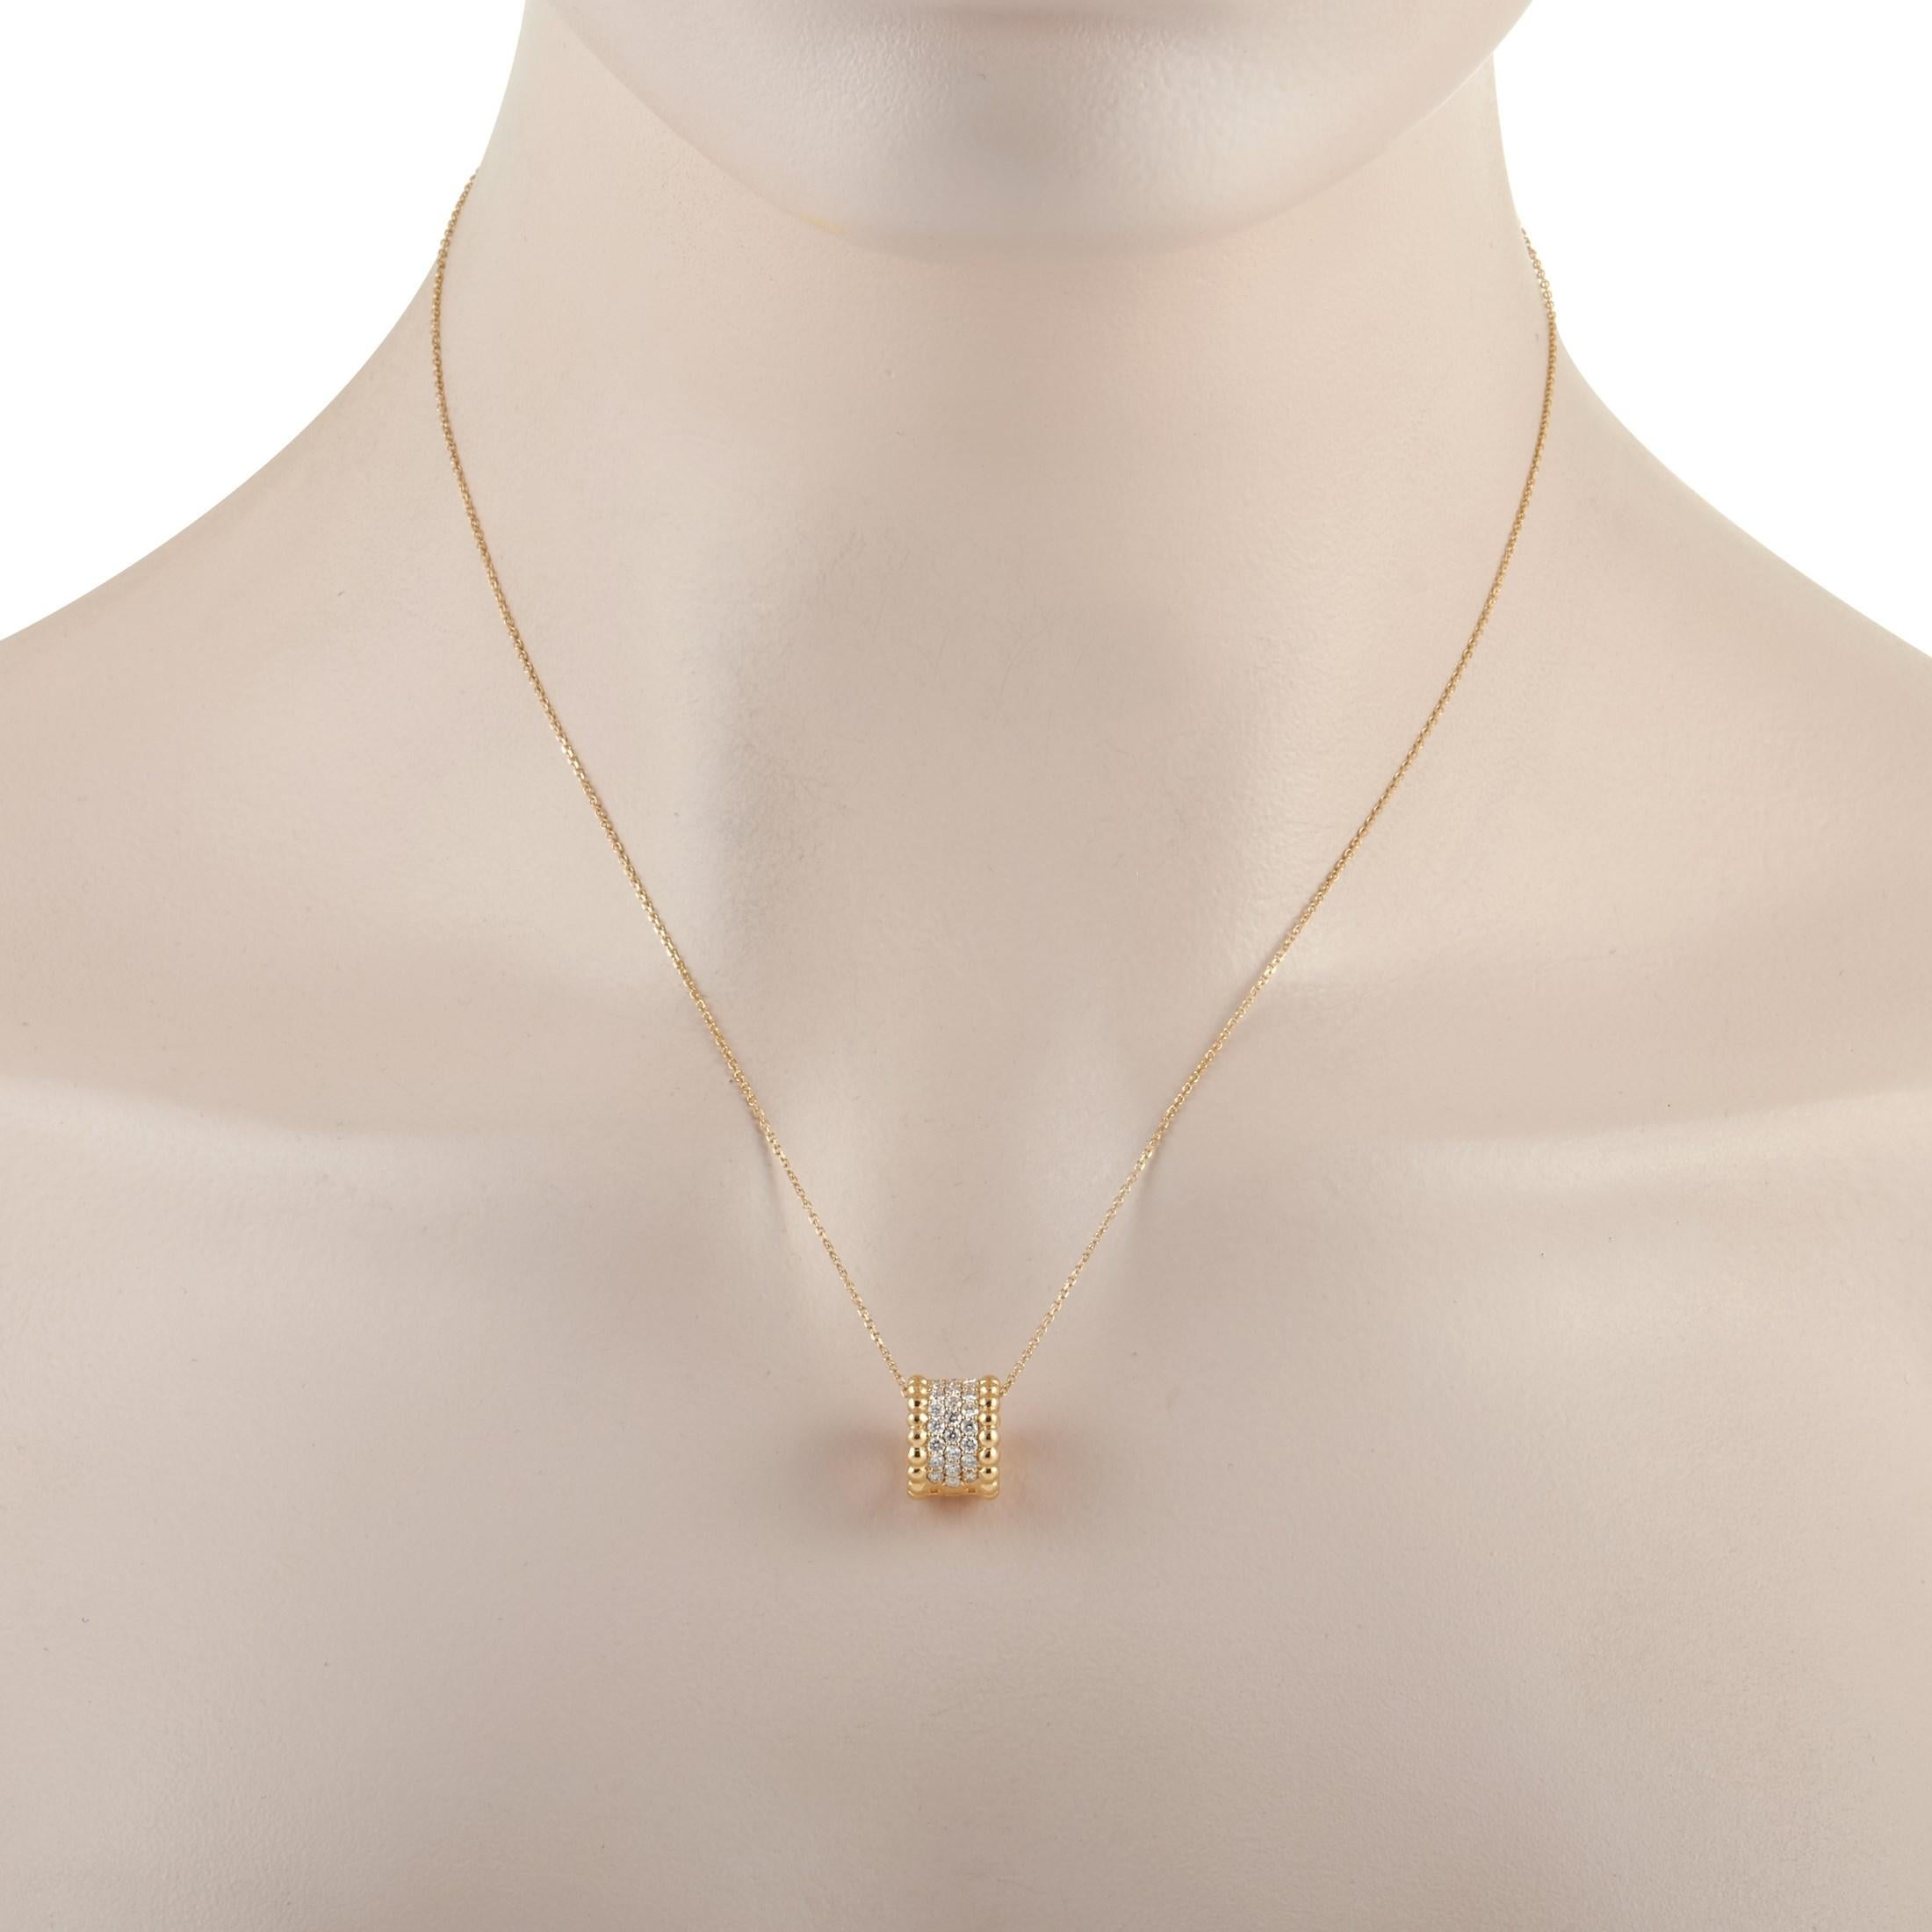 This modern LB Exclusive pendant necklace is made with an 18K yellow gold chain and features a yellow gold pendant set with three rows of round diamond measuring 0.58 carats. The dainty 18K yellow gold chain measures 17 inches in length. The diamond